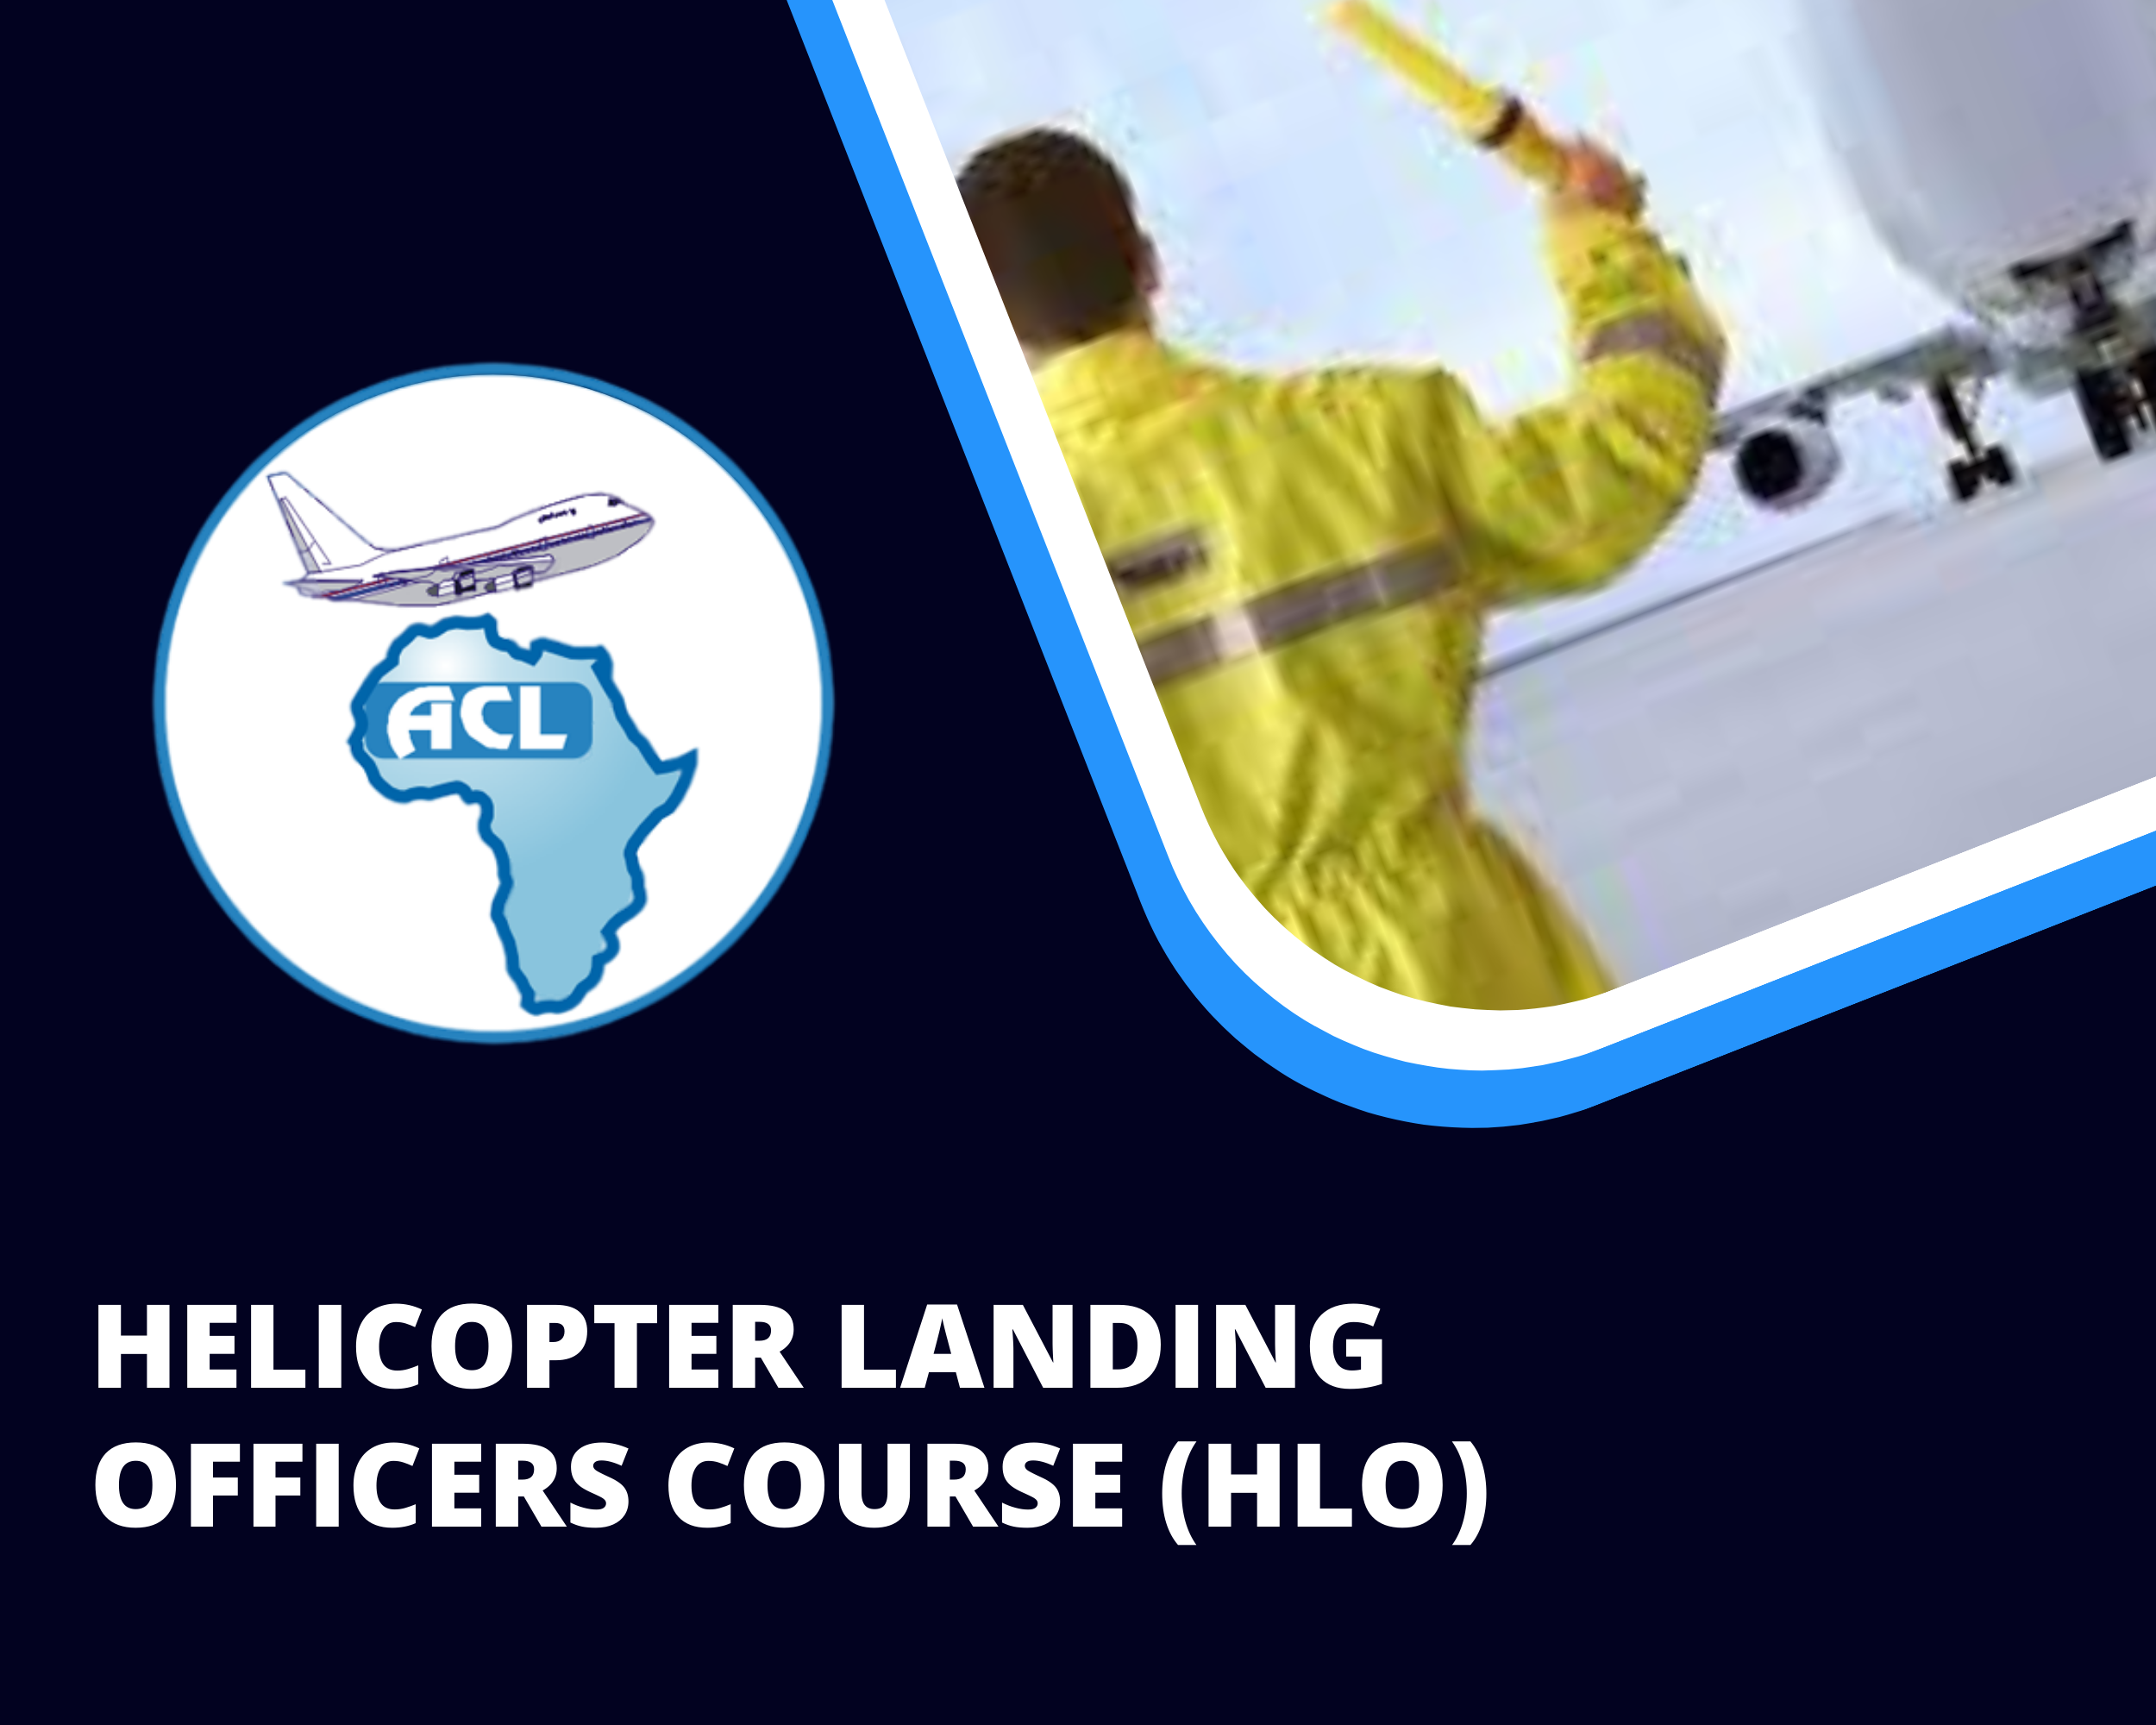 HELICOPTER LANDING OFFICERS COURSE (HLO)